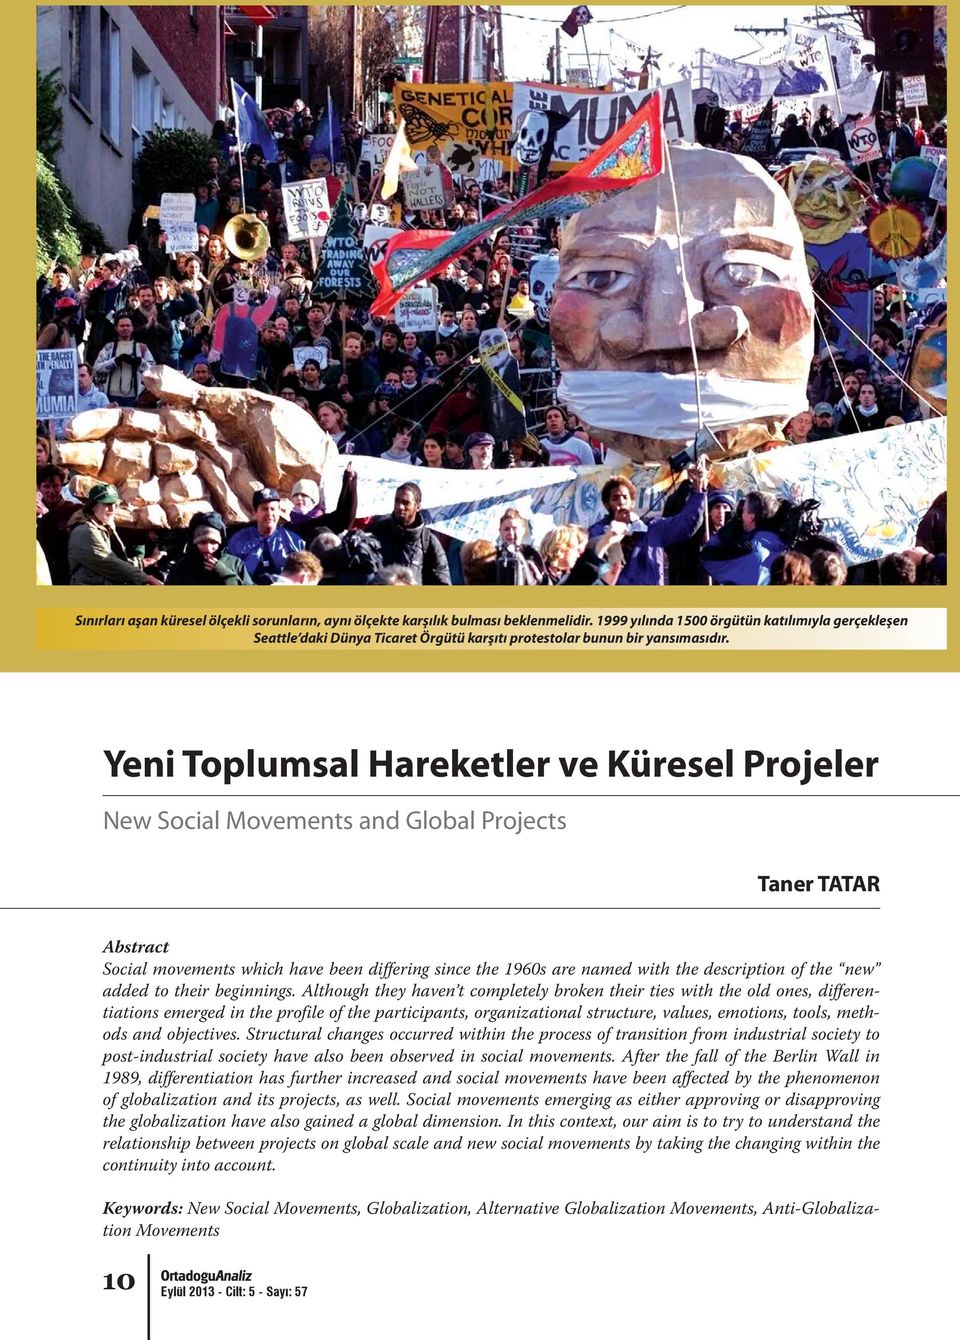 Yeni Toplumsal Hareketler ve Küresel Projeler New Social Movements and Global Projects Taner TATAR Abstract Social movements which have been differing since the 1960s are named with the description